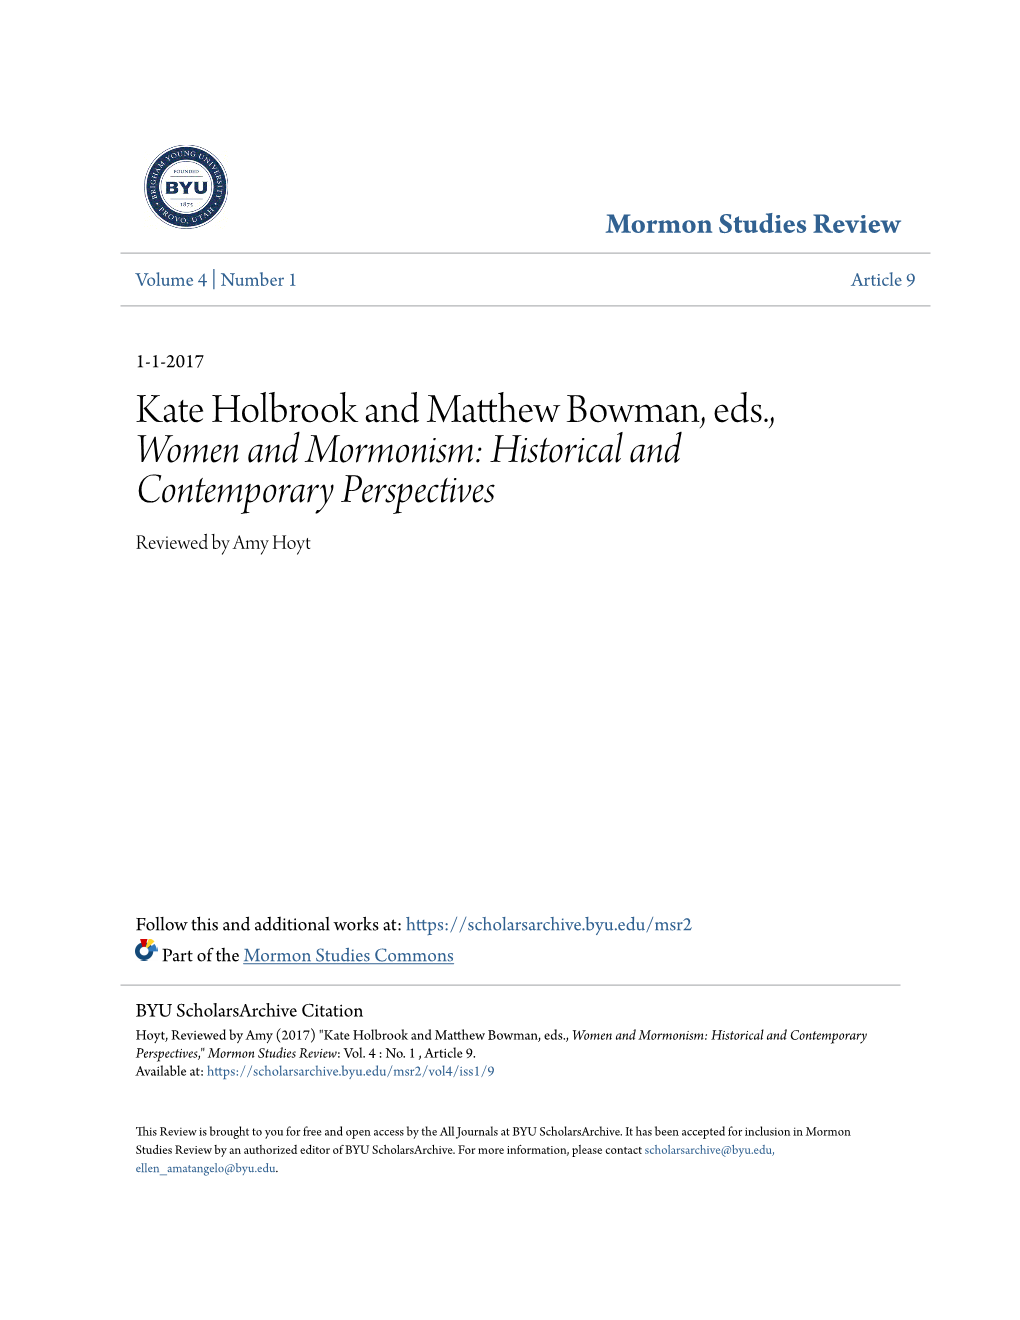 Kate Holbrook and Matthew Bowman, Eds., Women and Mormonism: Historical and Contemporary Perspectives Reviewed by Amy Hoyt